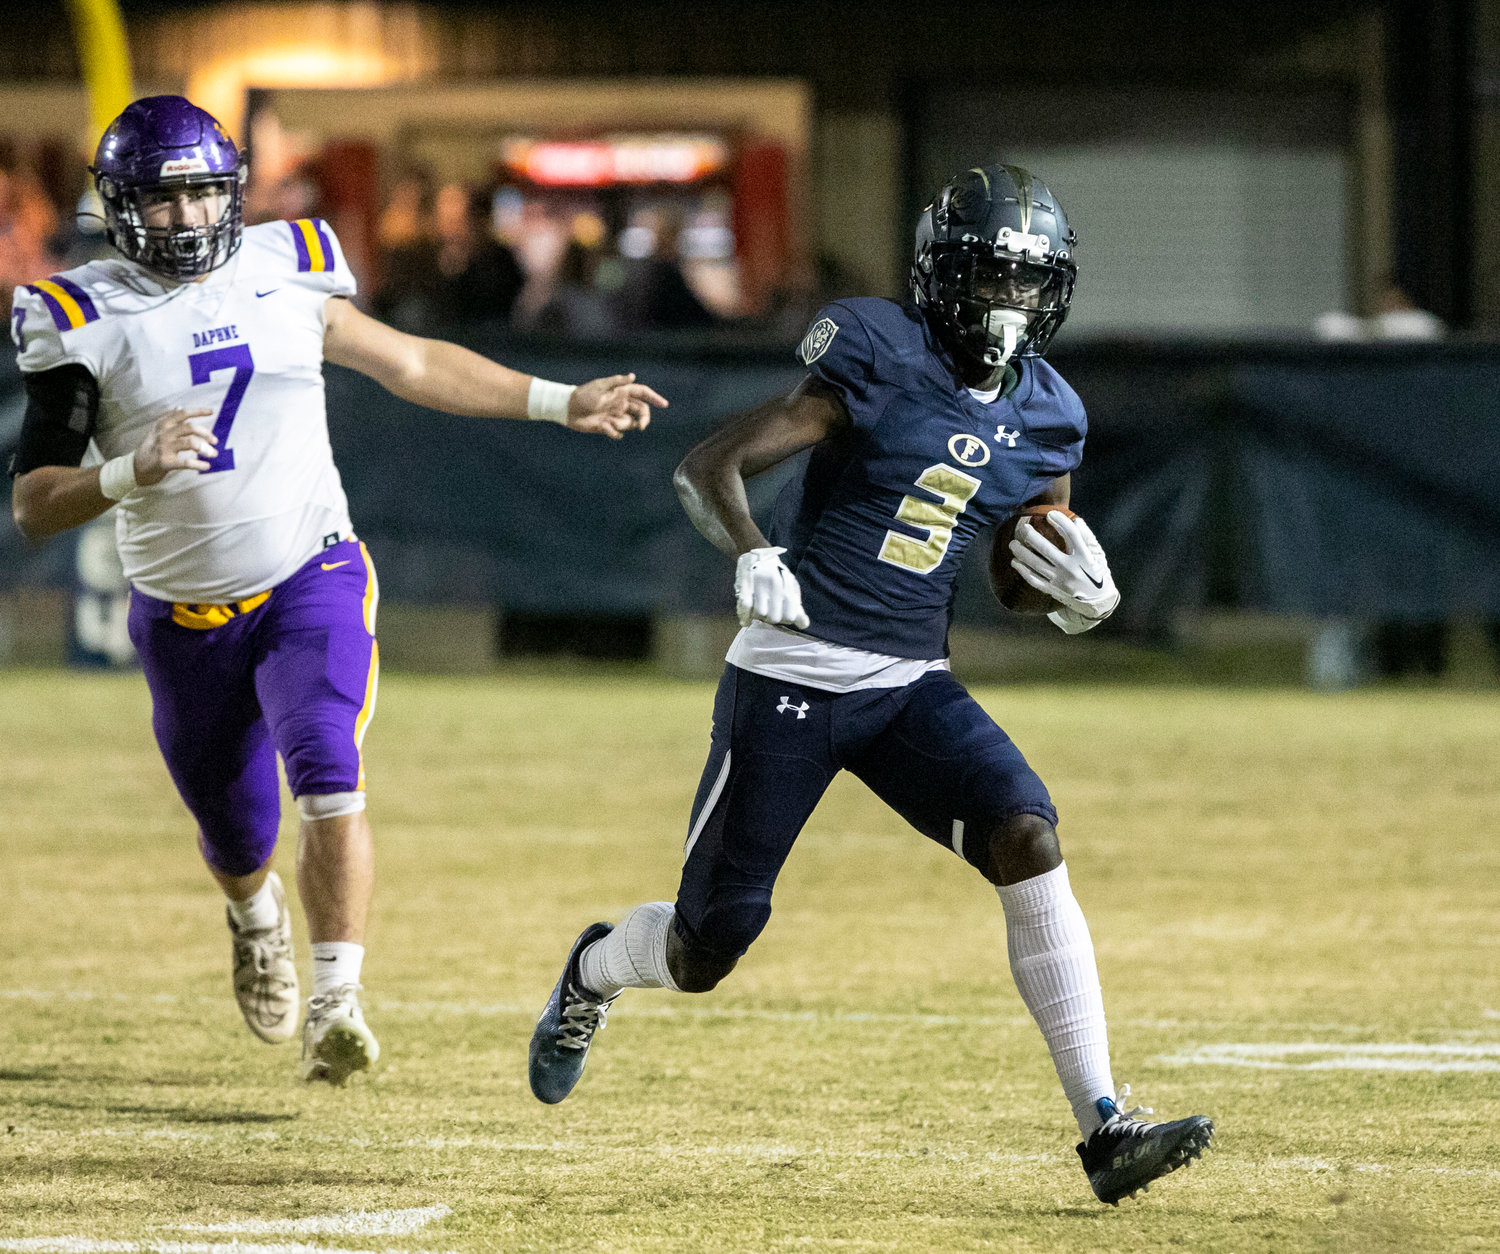 Foley receiver Harrison Knight hits the open field after a first-quarter catch in the Lions’ Friday home game against the Daphne Trojans for the Class 7A Region 1 title. Knight hauled in a touchdown pass in the third quarter to help Foley win 34-7.